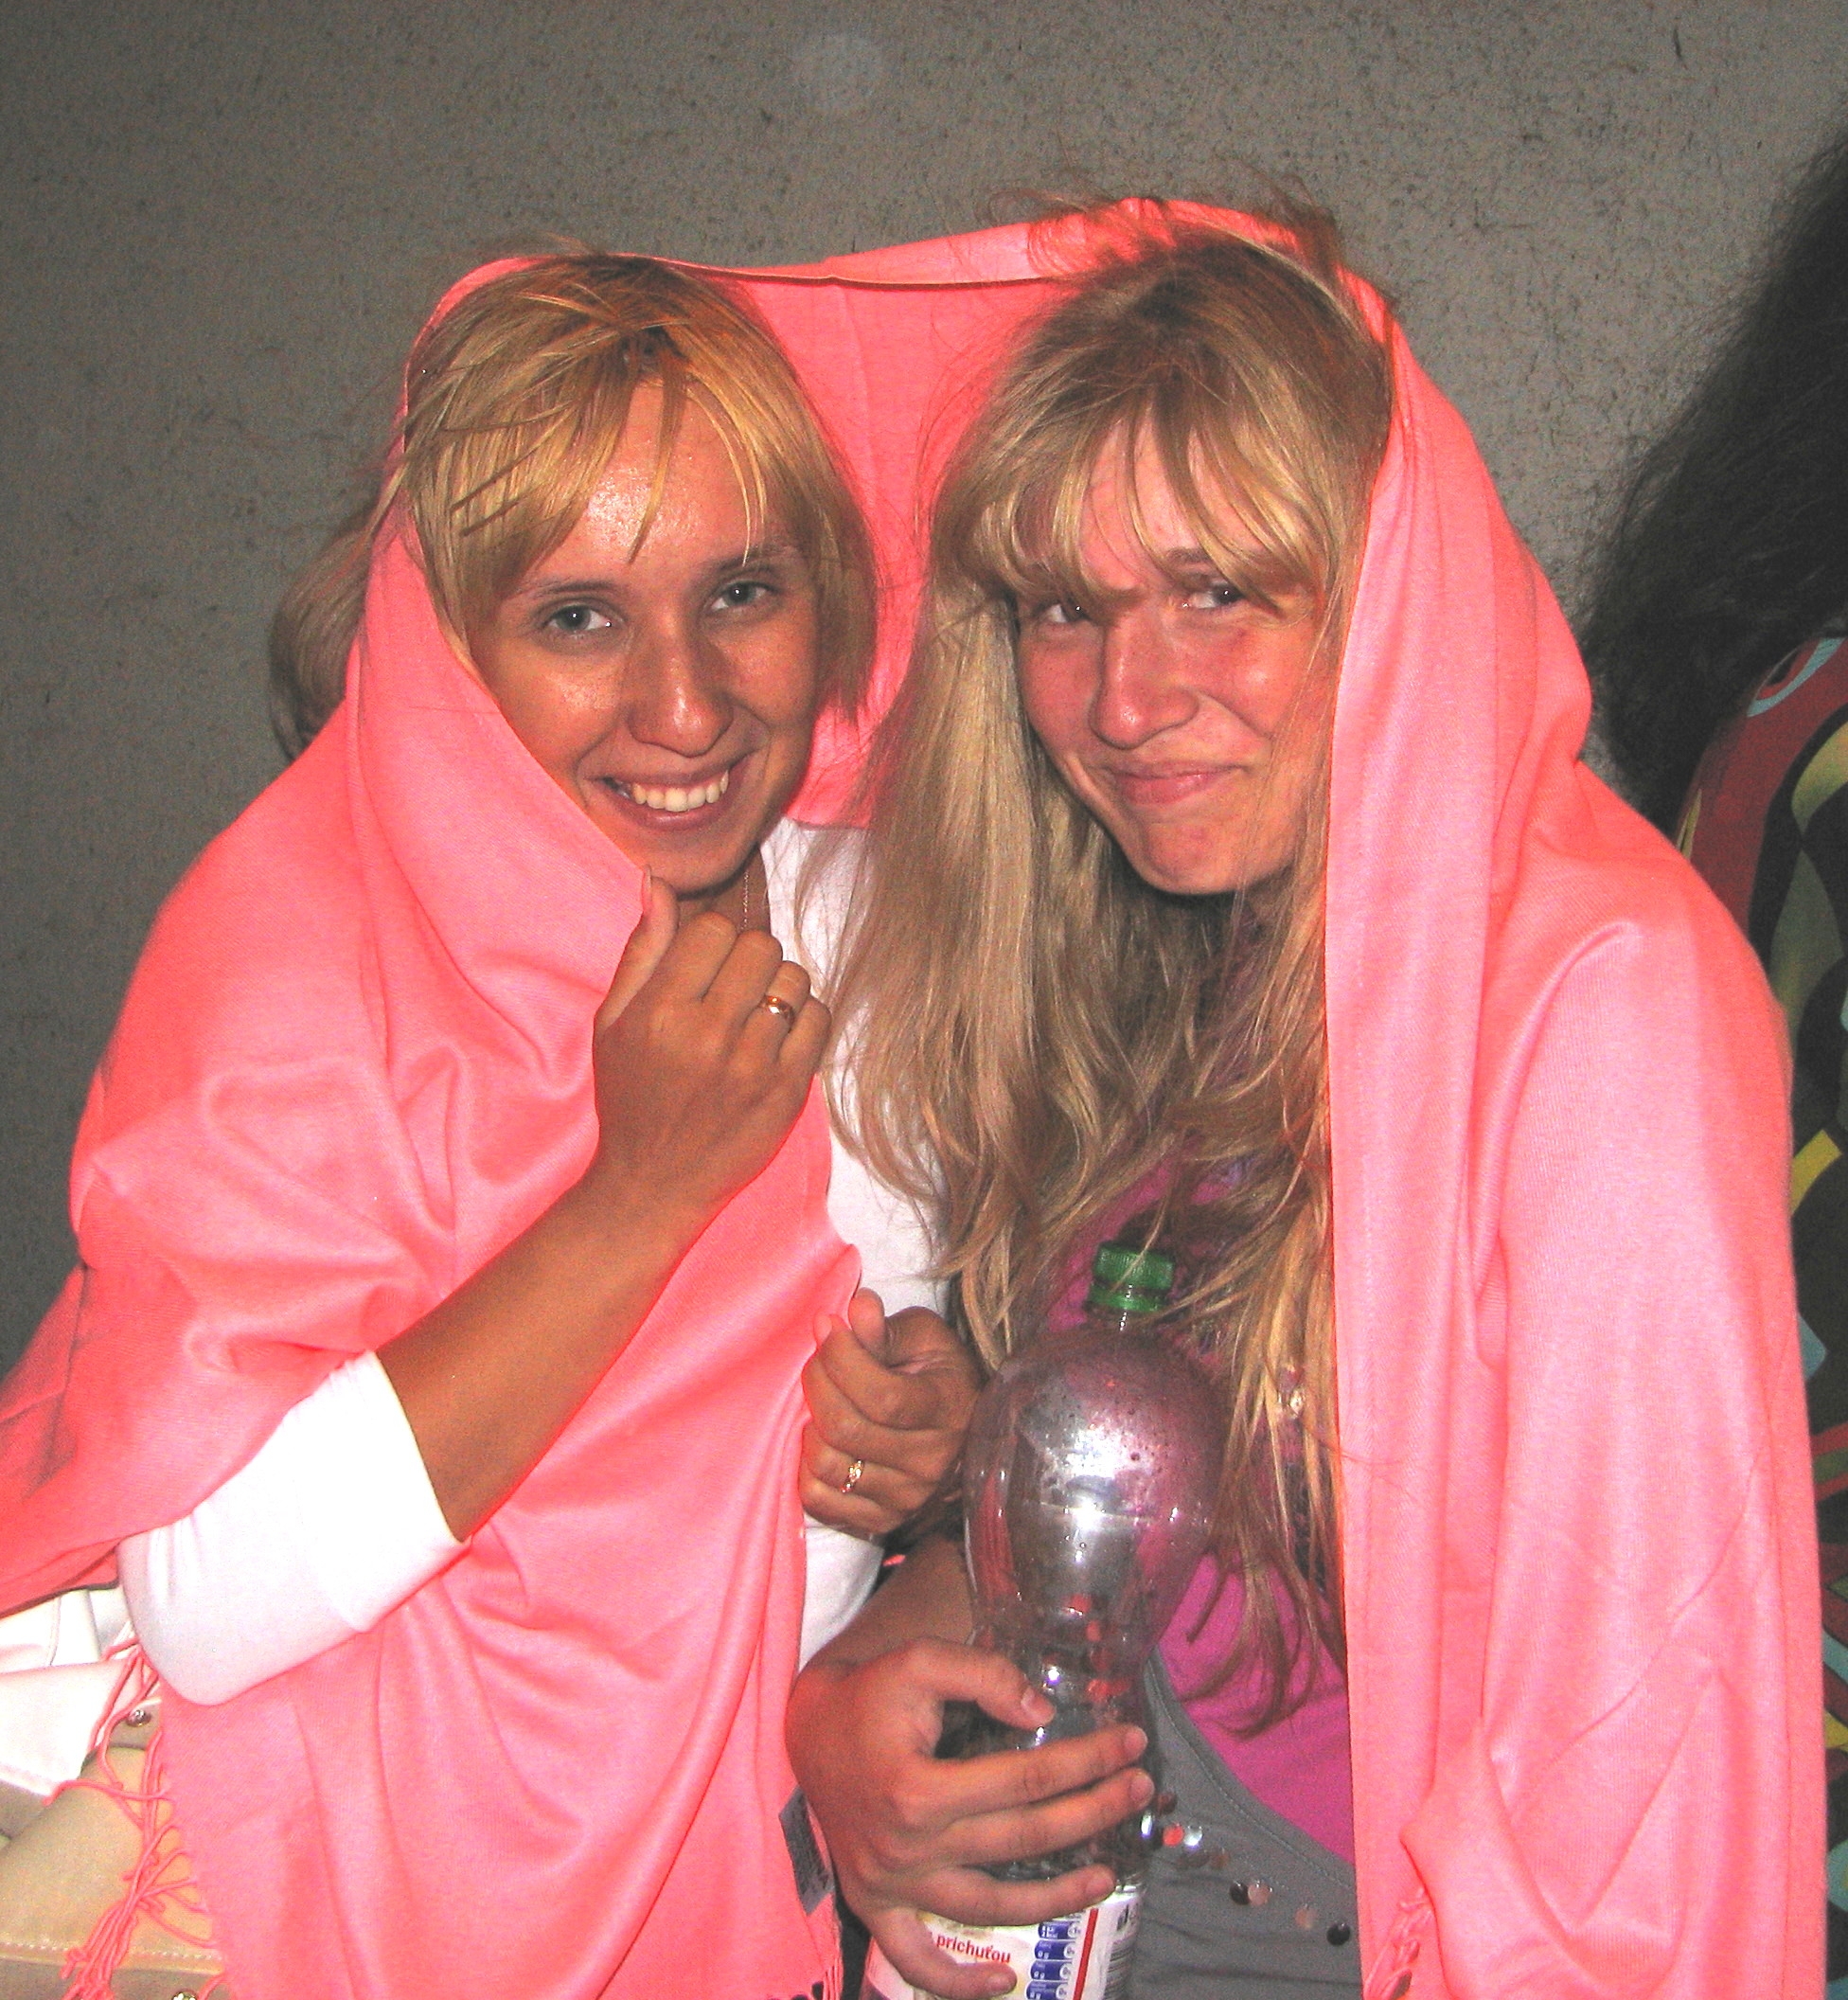 Two blond chicks hiding from rain - picture 6, cropped and edited